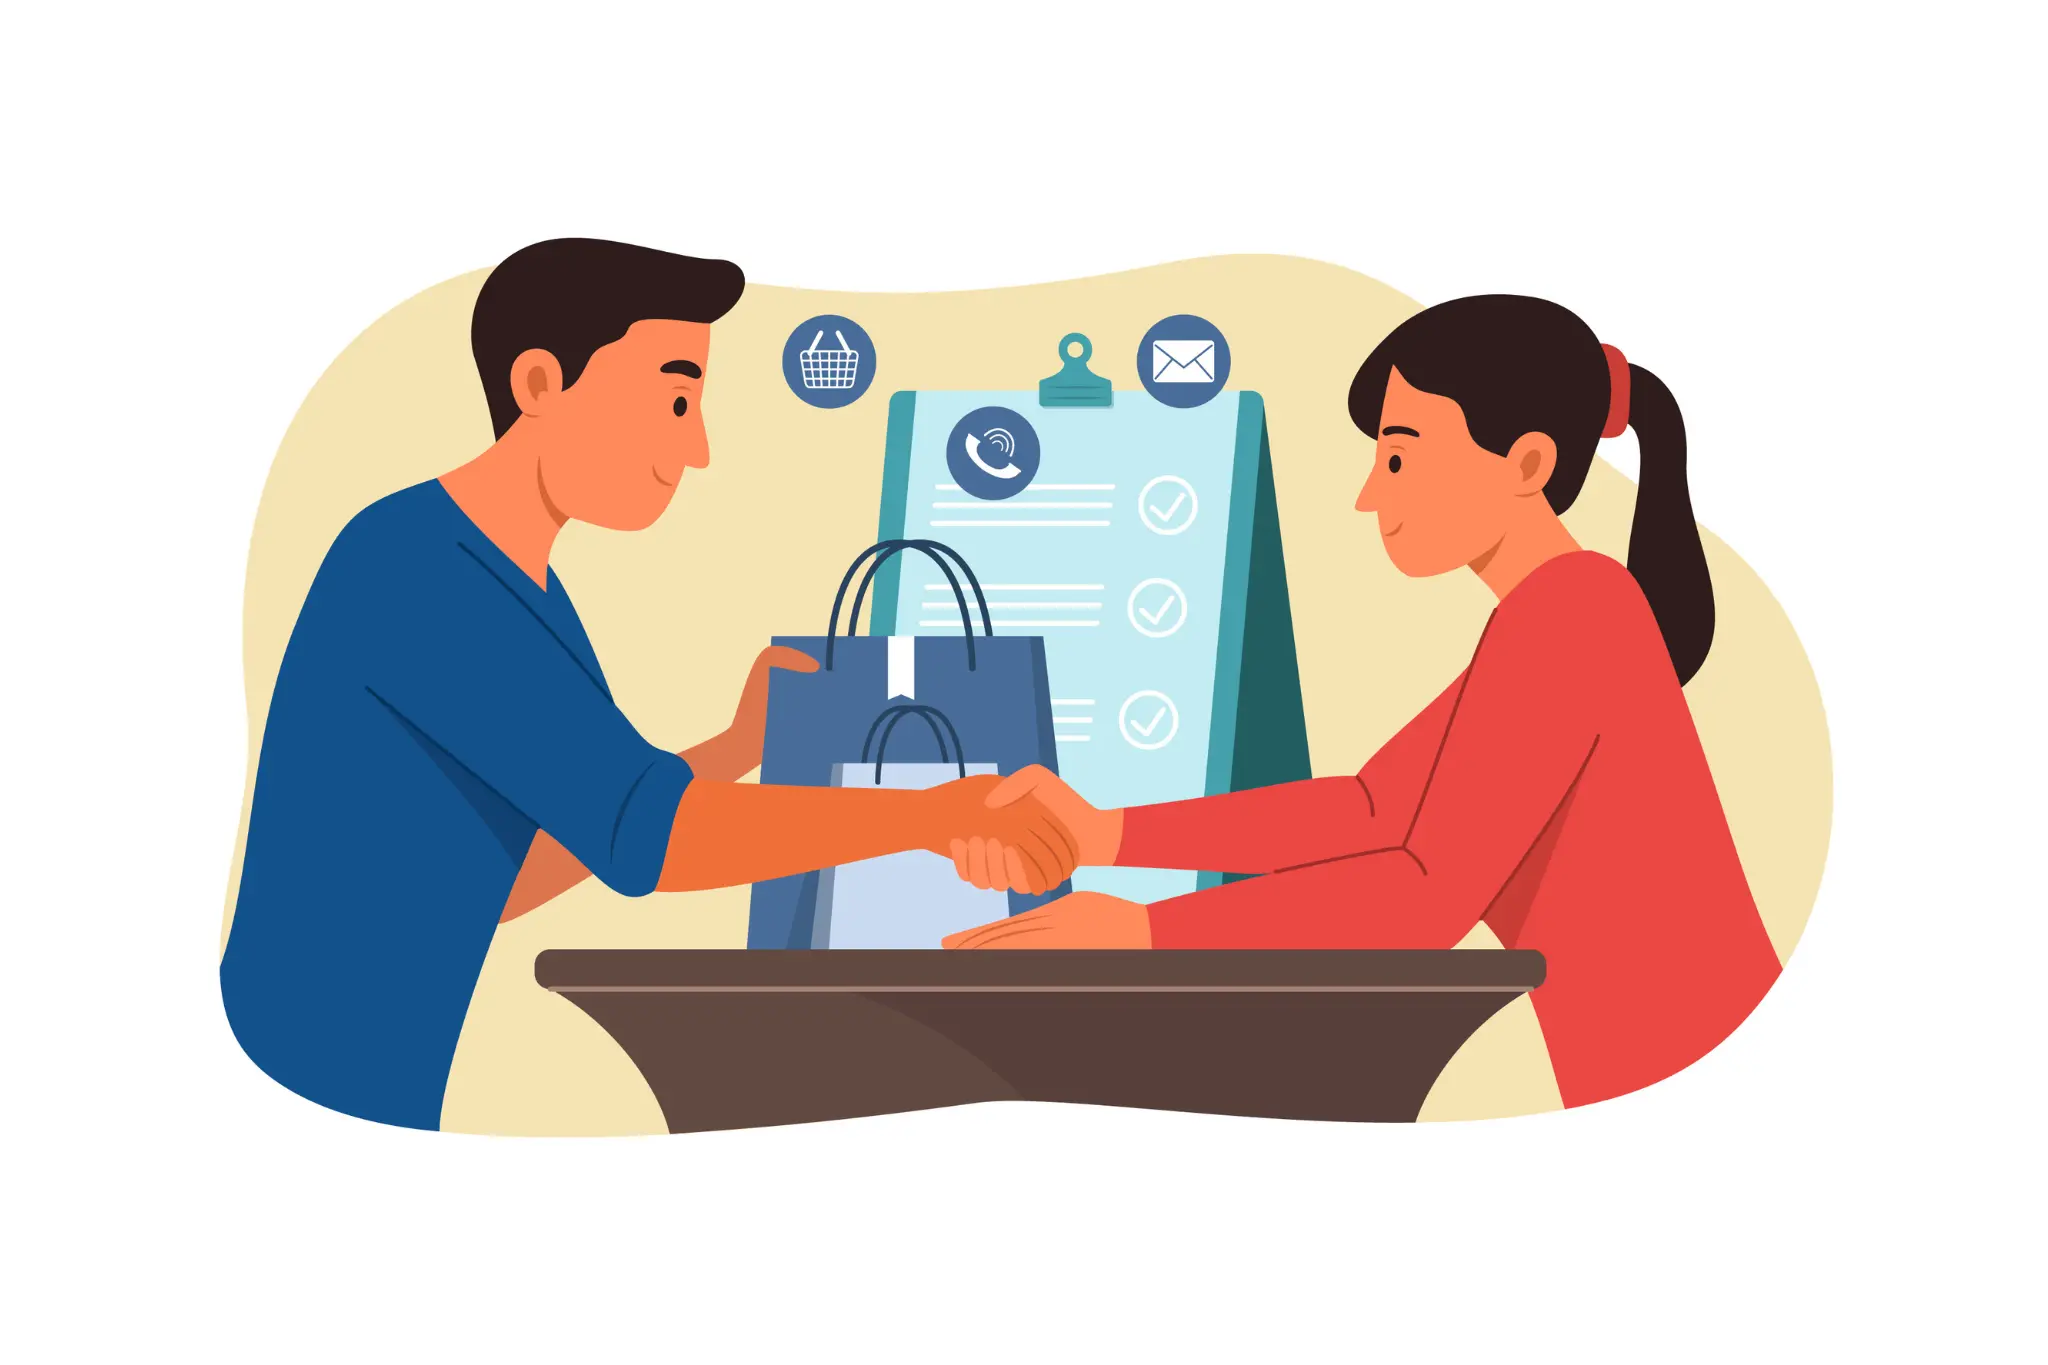 A man and a woman shaking hands across a desk with digital business icons in the background, symbolizing sales potential and customer trust